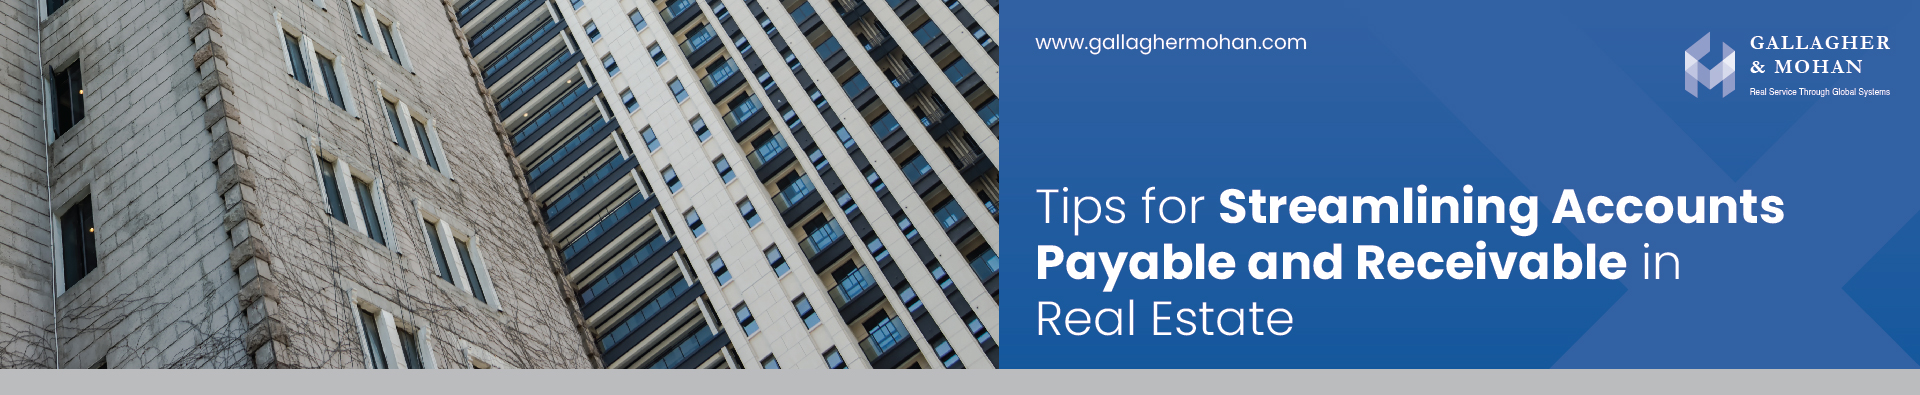 Tips For Streamlining Accounts Payable And Receivable In Real Estate